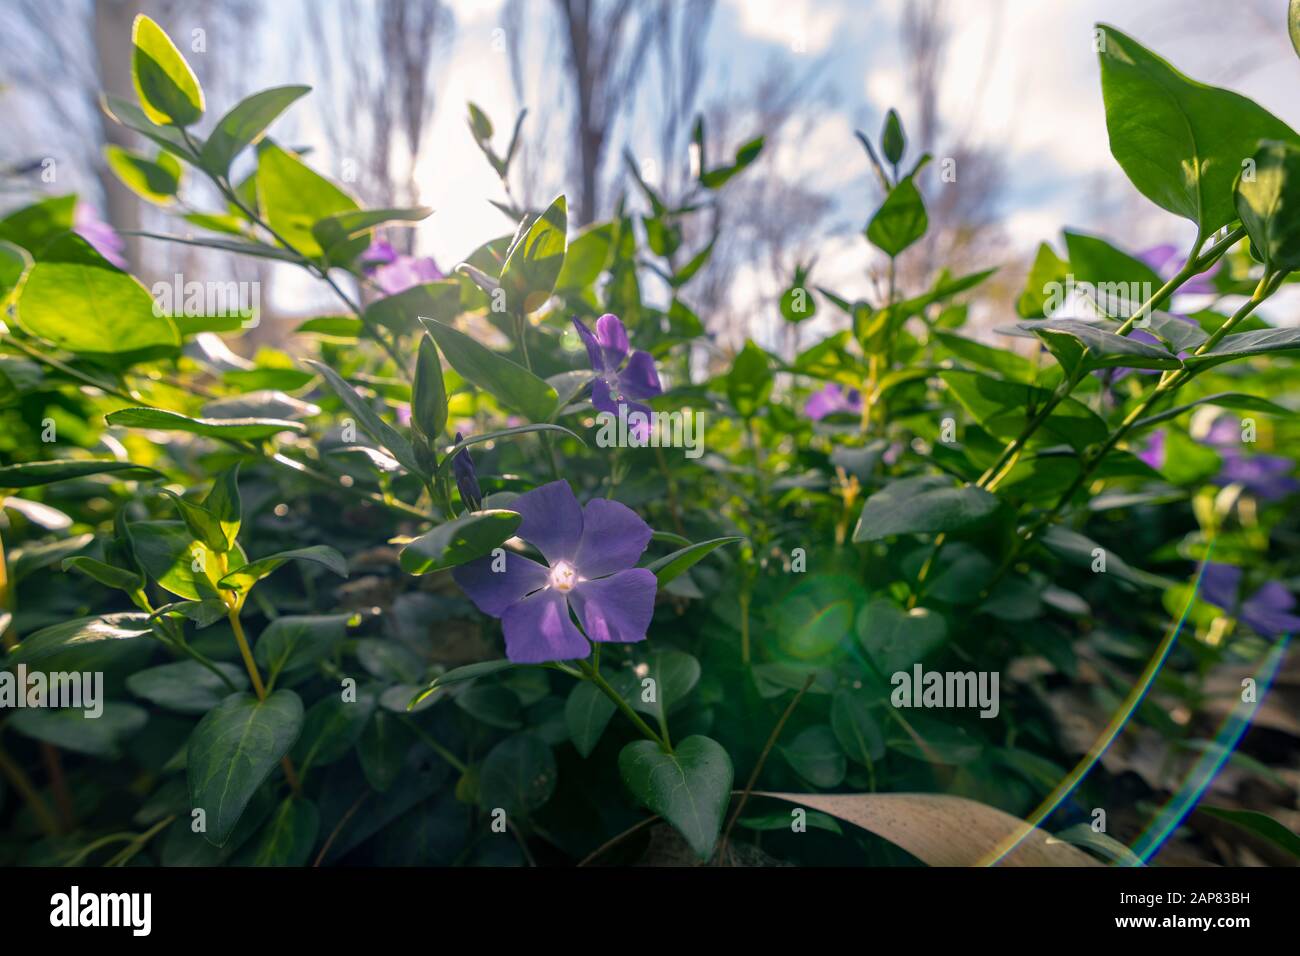 Ipomoea Nil is a species of plant of the family Convolvulaceae. Stock Photo